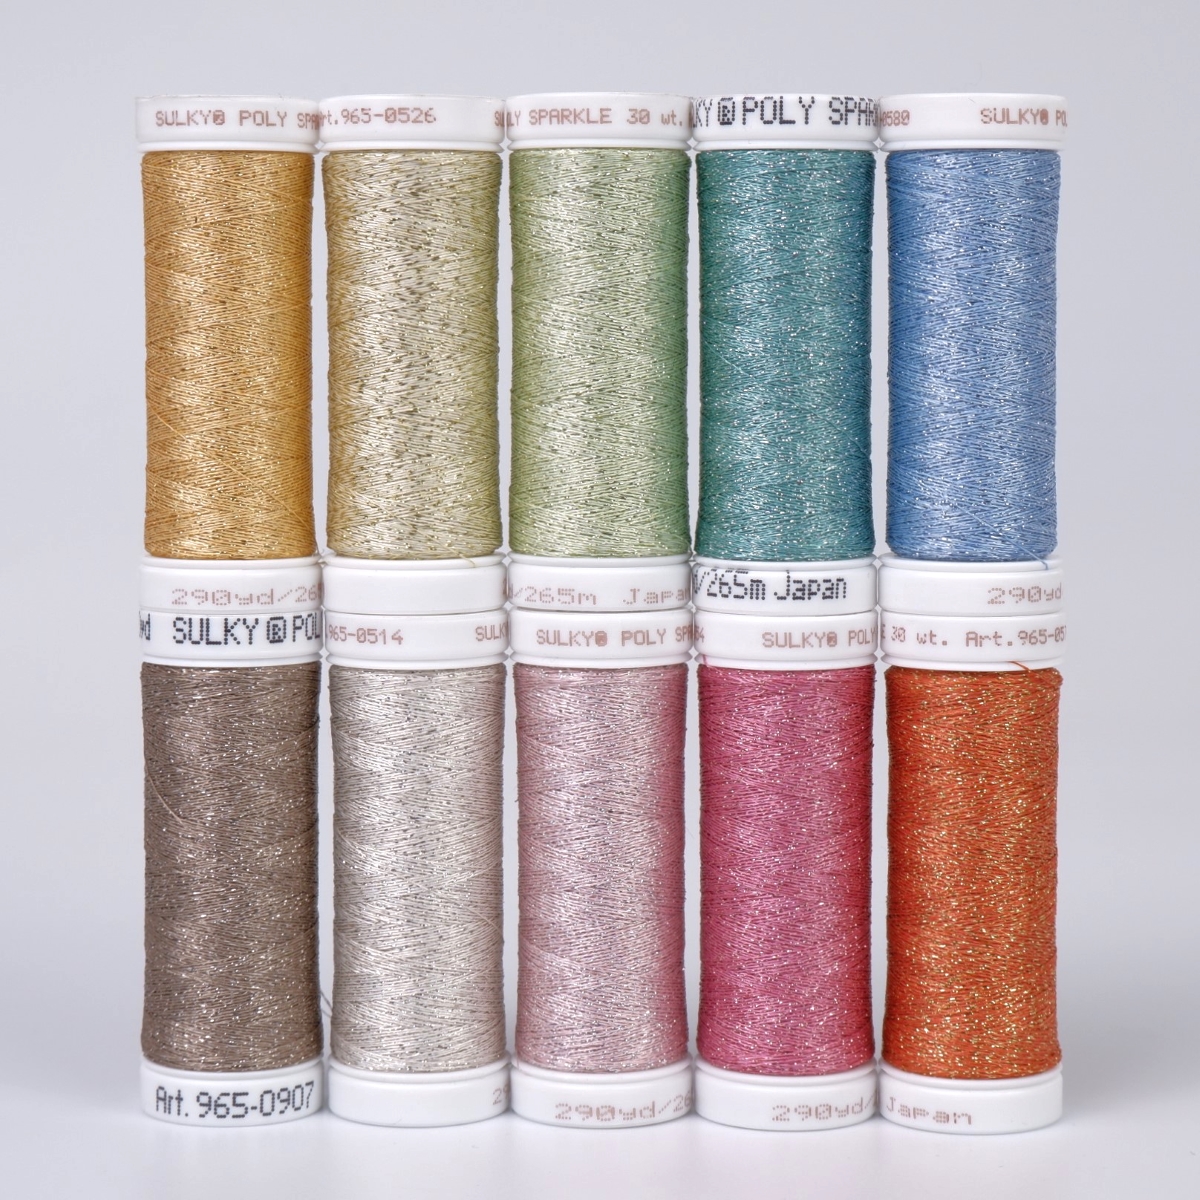 SULKY POLY SPARKLE 30 - Glittering Pastel
(10x 265m Snap Spools)